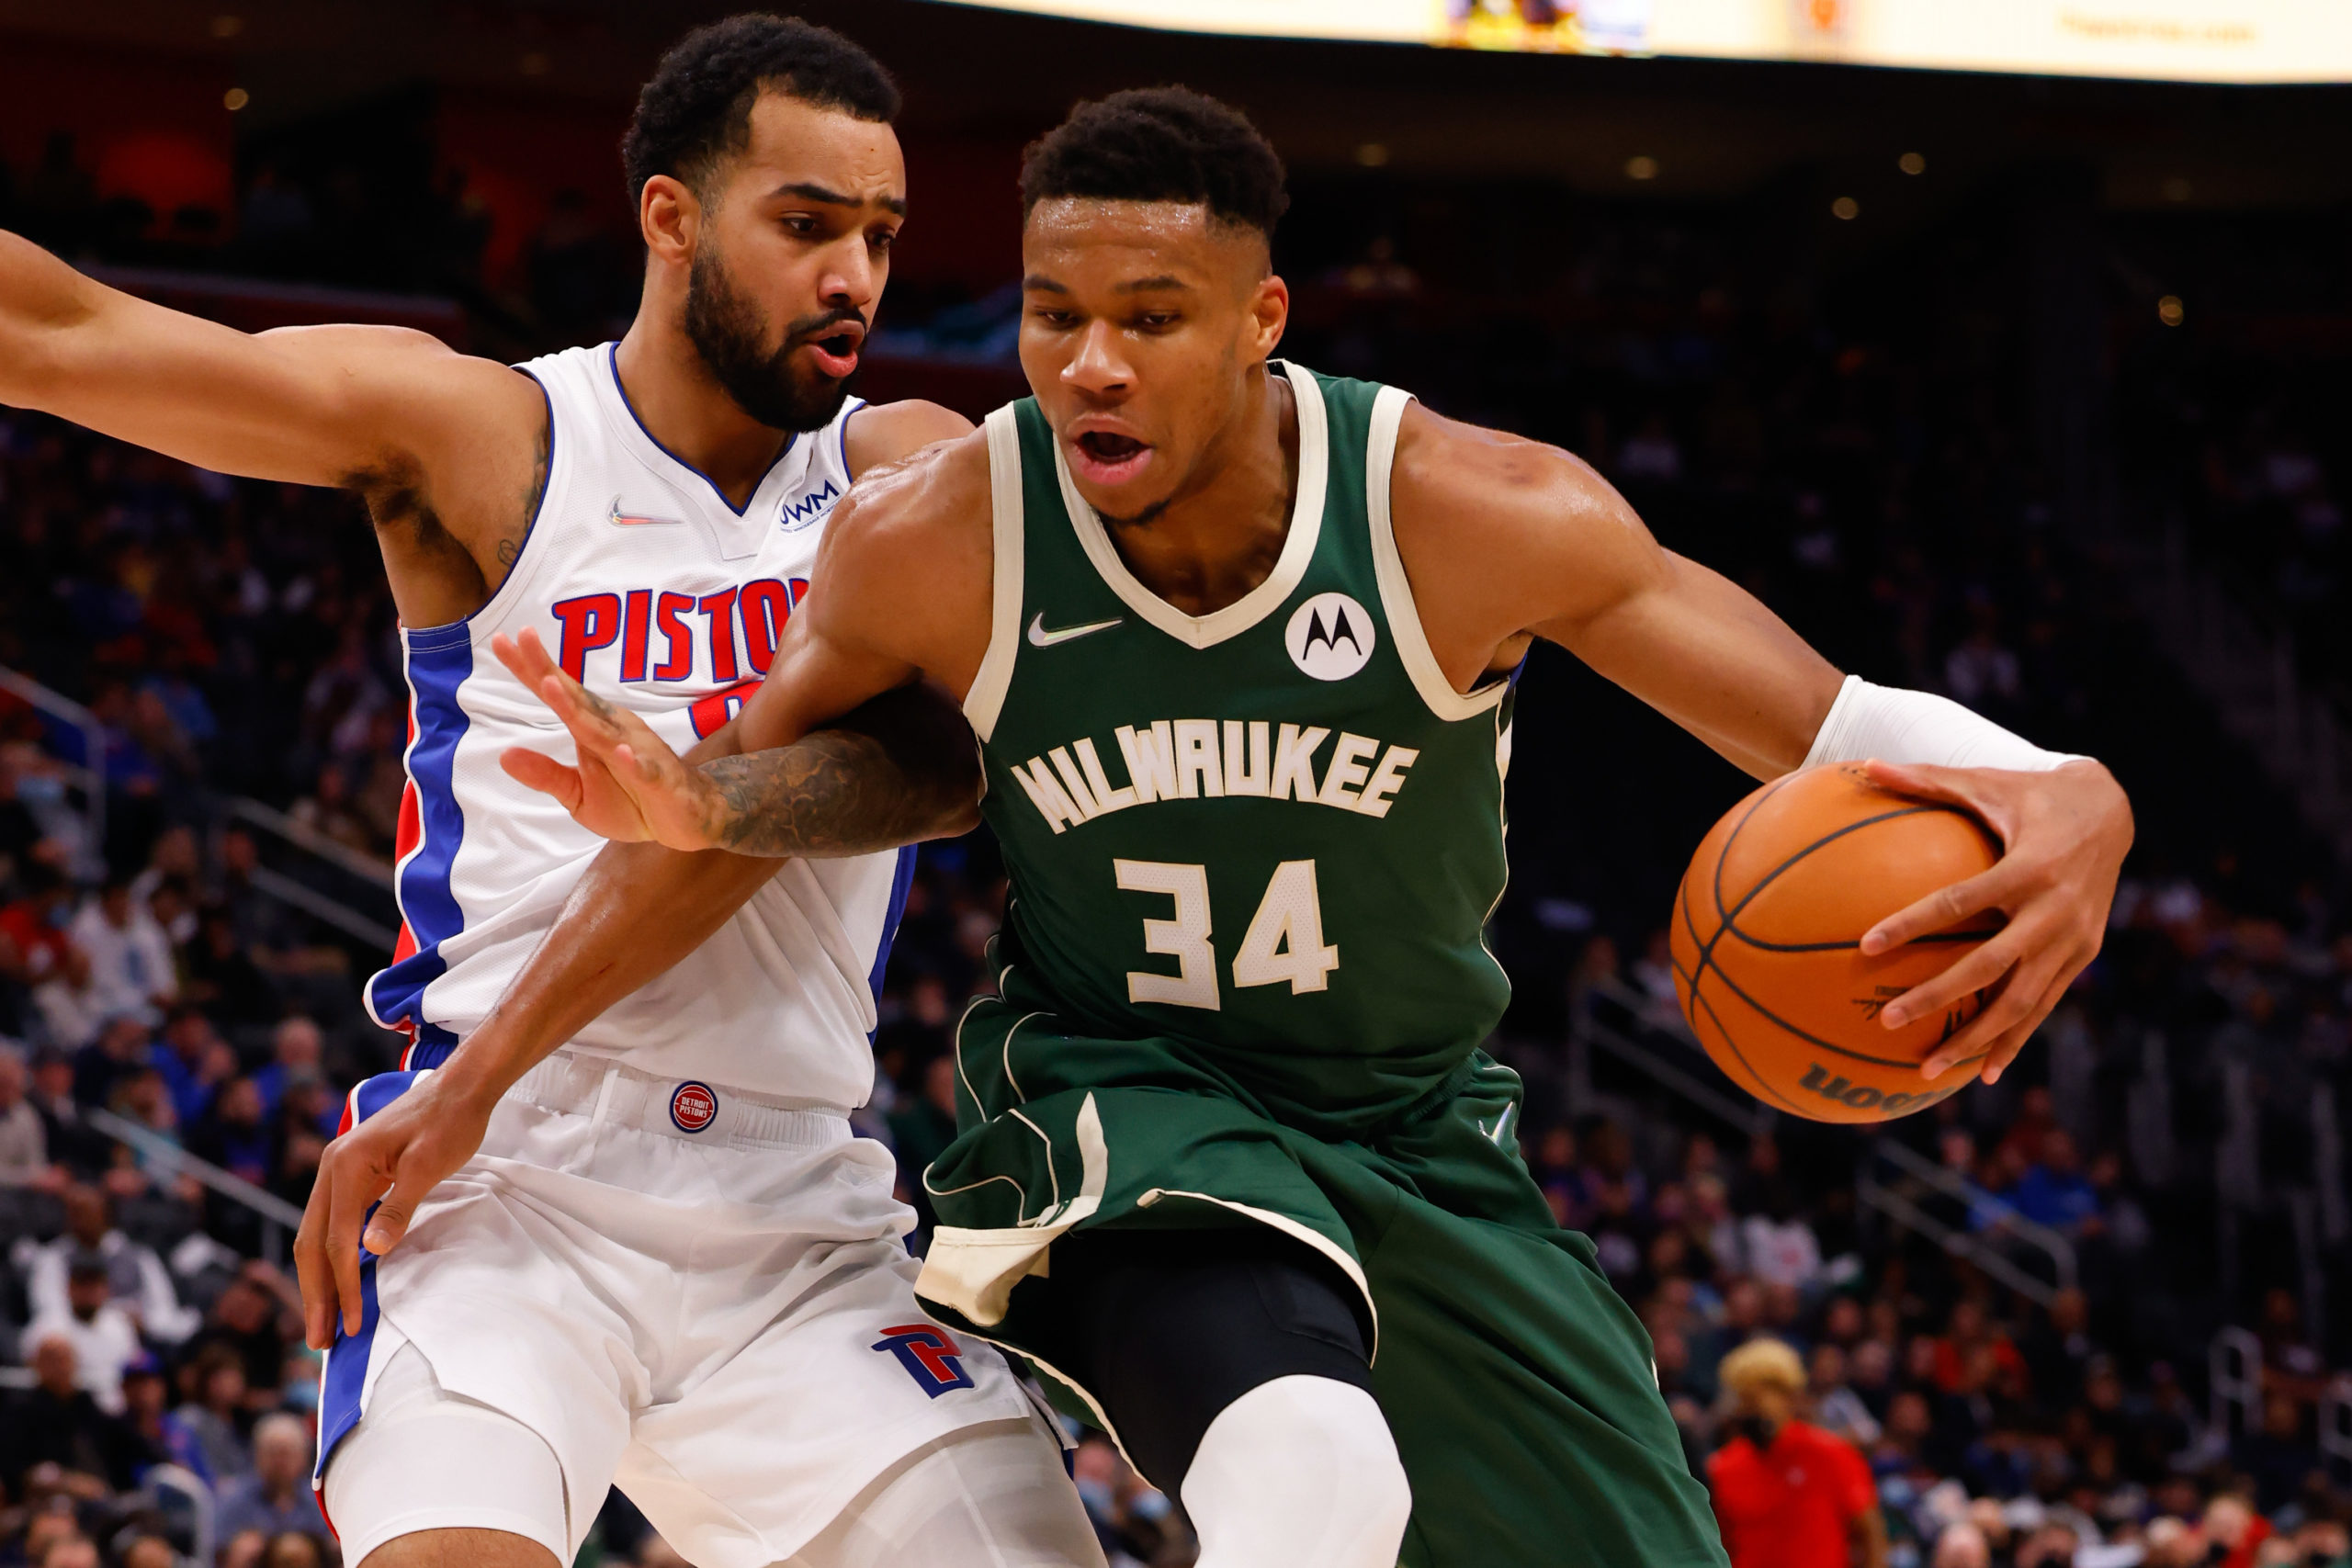 Milwaukee Bucks forward Giannis Antetokounmpo (34) is defended by Detroit Pistons forward Trey Lyles (8) in the first half at Little Caesars Arena